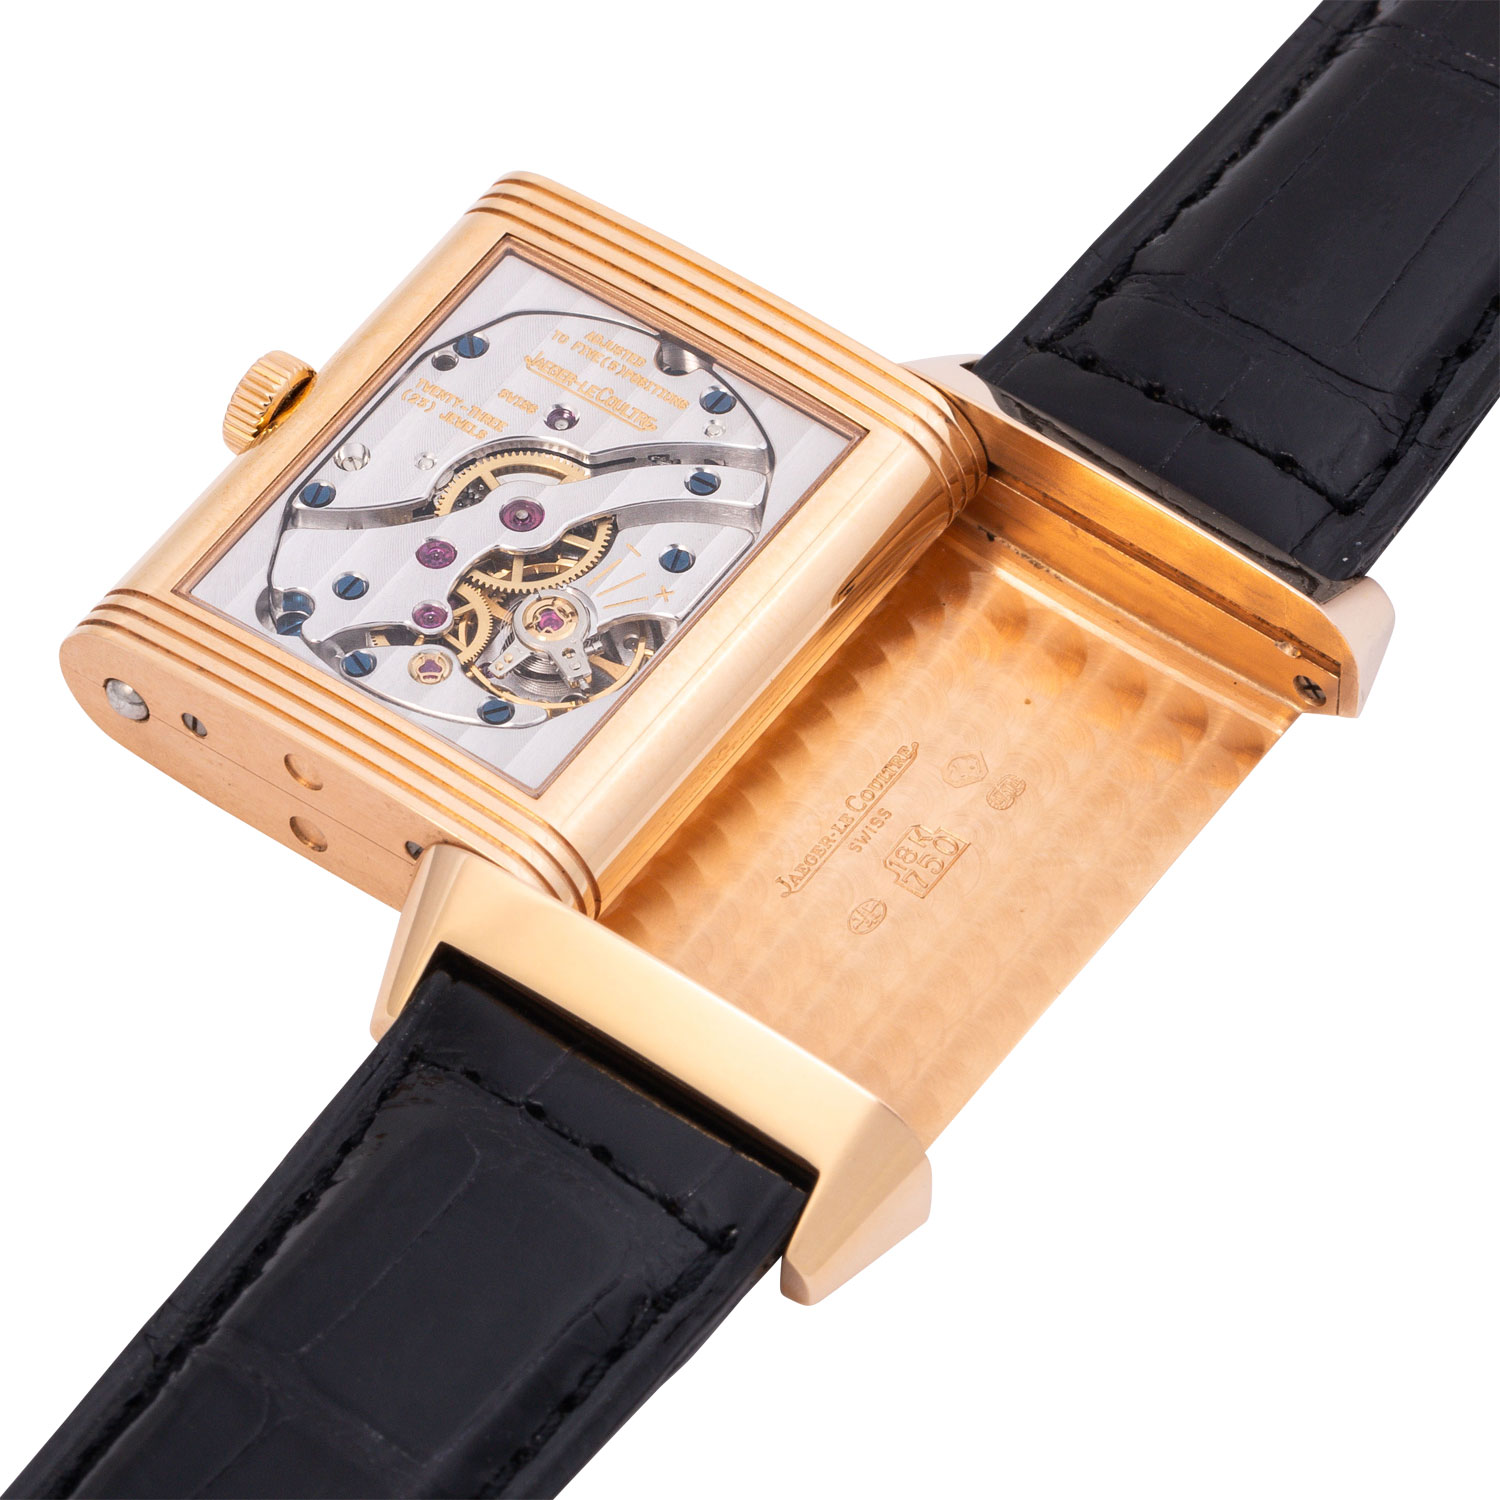 JAEGER-LeCOULTRE limitierte Reverso Night & Day "125 Jahre Wempe", Ref. 270.2.44. Full Set 2003. - Image 6 of 9